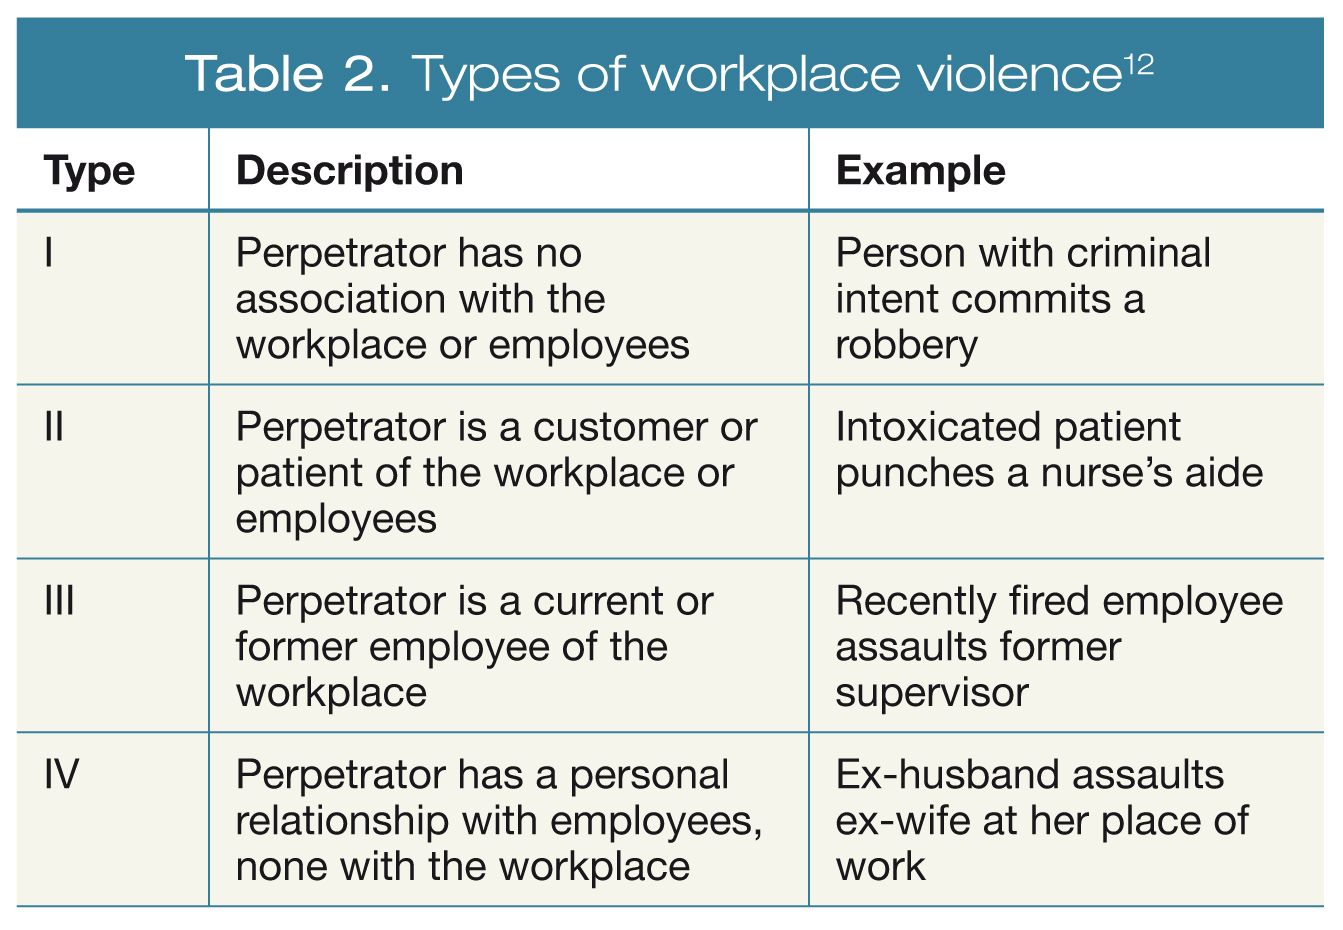 Types of workplace violence